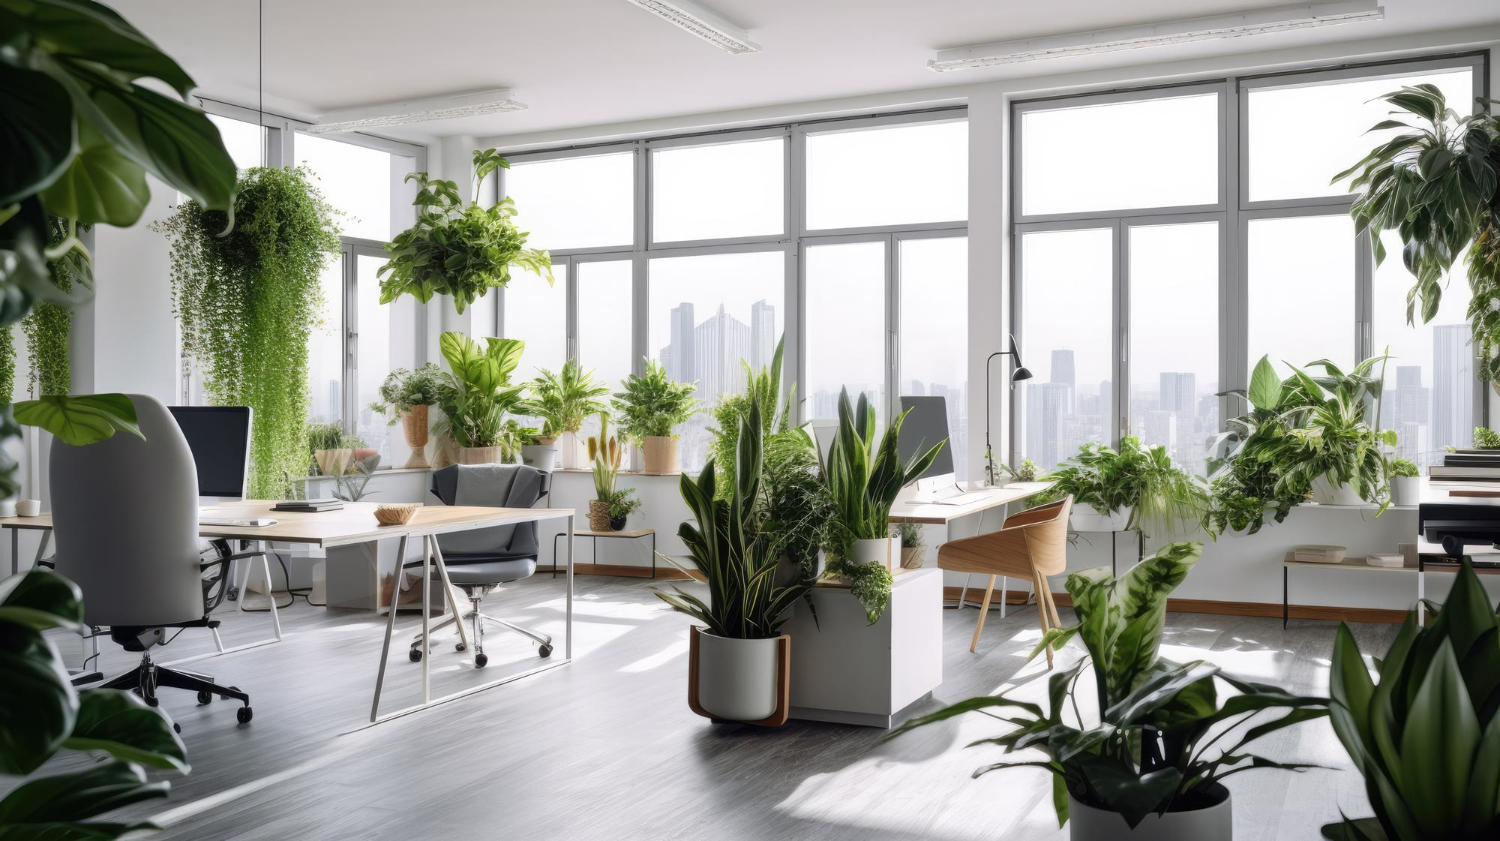 Green office space with plants and natural elements enhancing productivity.